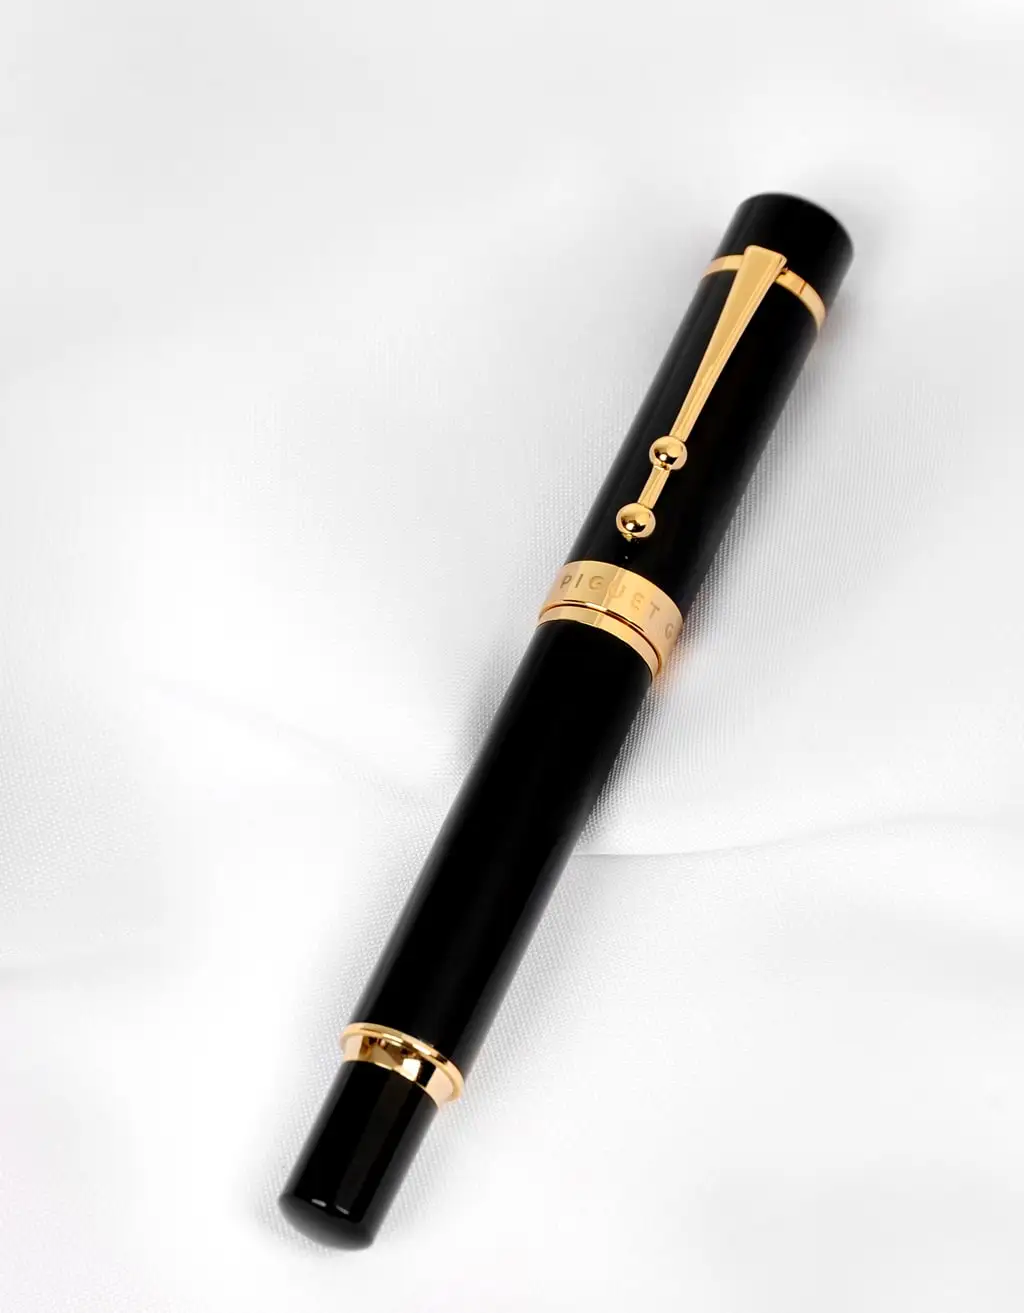 T A U R U S - Stunning Luxury Pen with Gold Plated, High quality Ink Refill, Best Swiss Rollerball Pen Gift Set for Men & Women